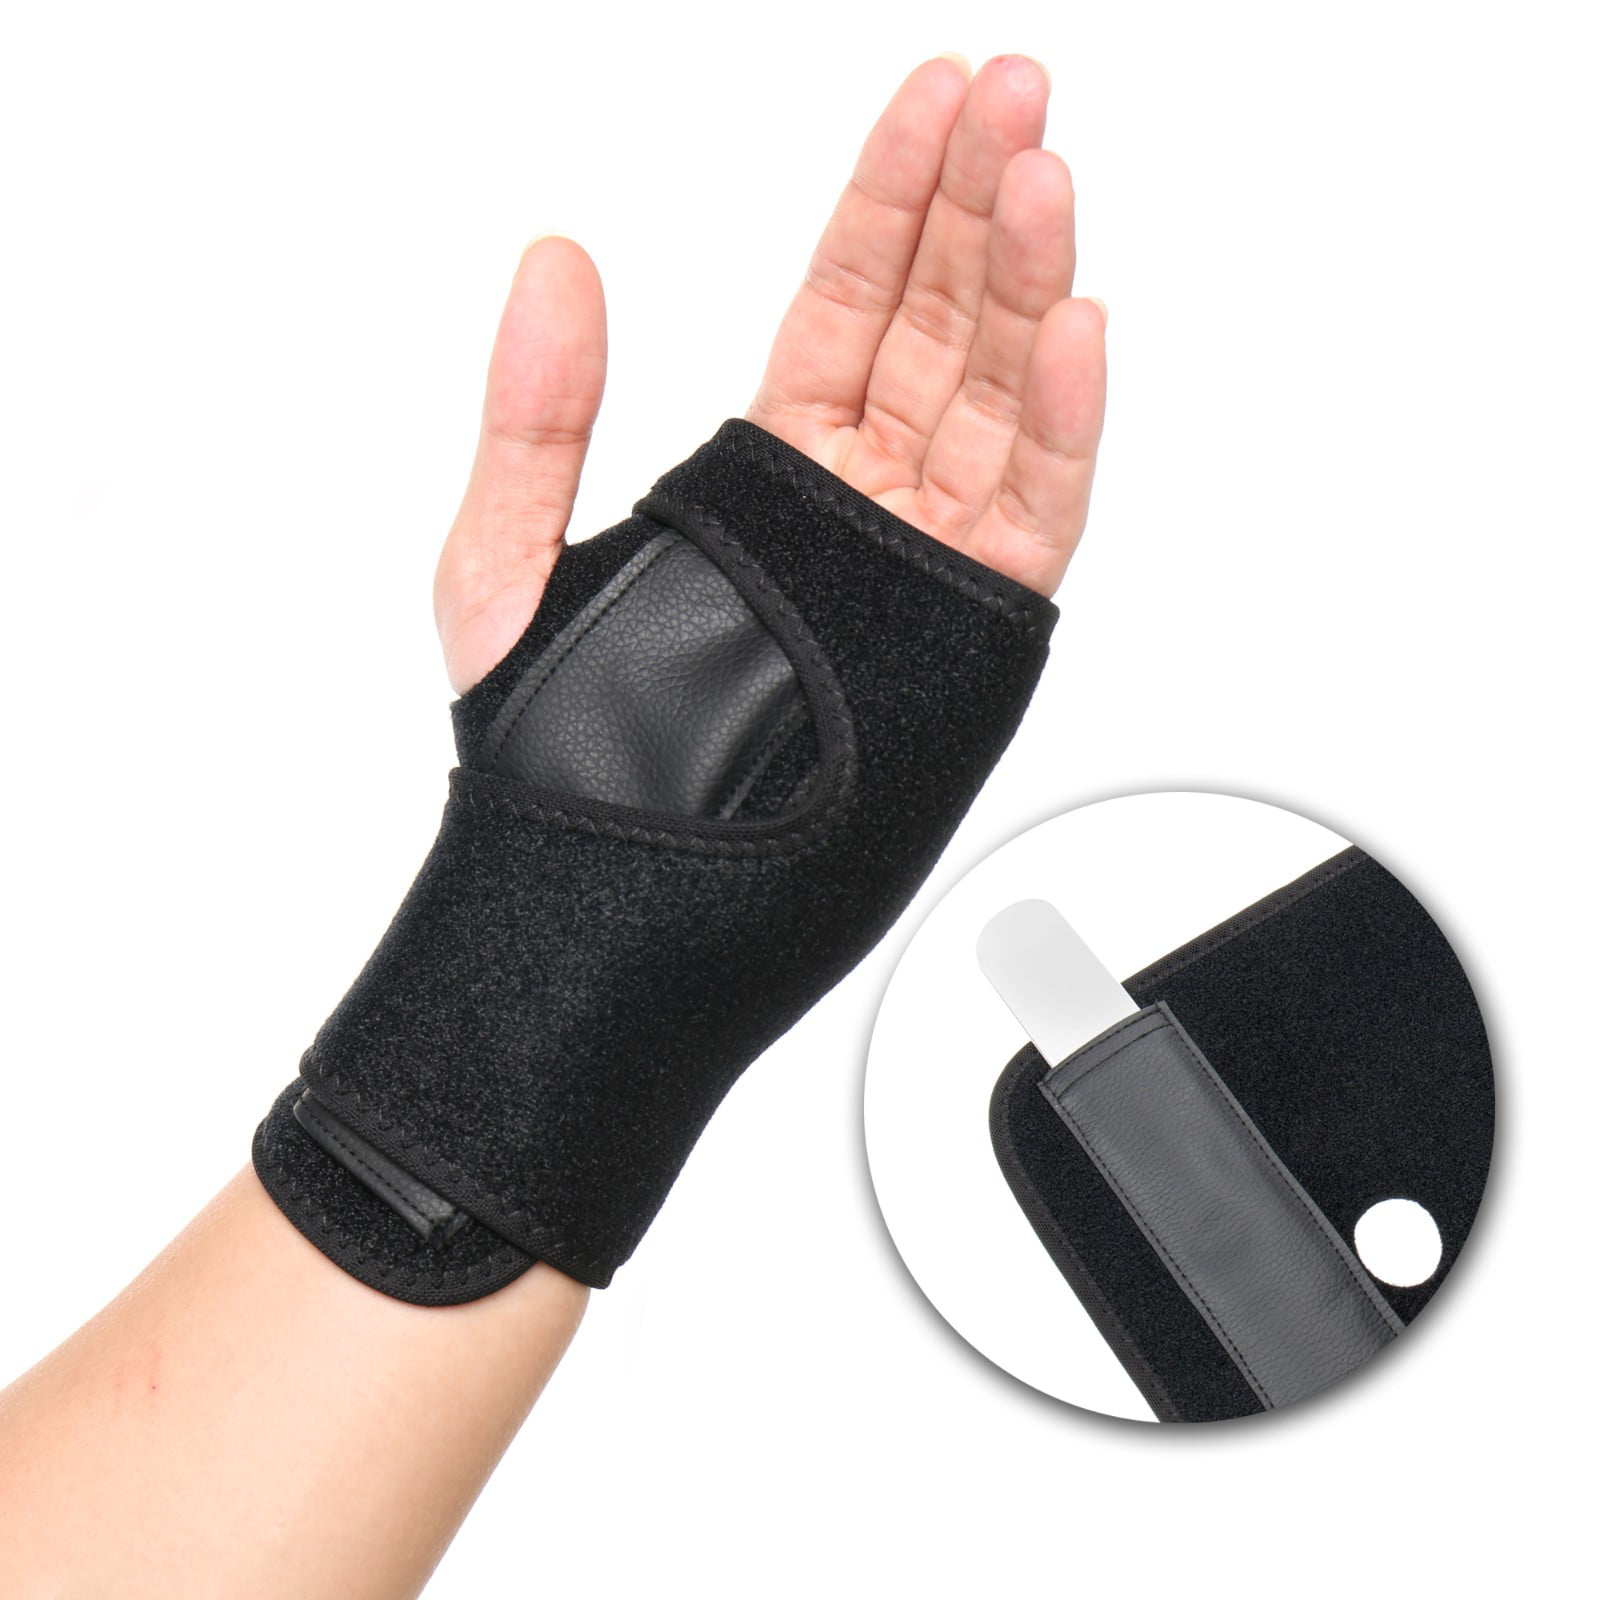 Cross Training Wrist Support Gym Workout Weight lifting Silicone Padding Gloves 